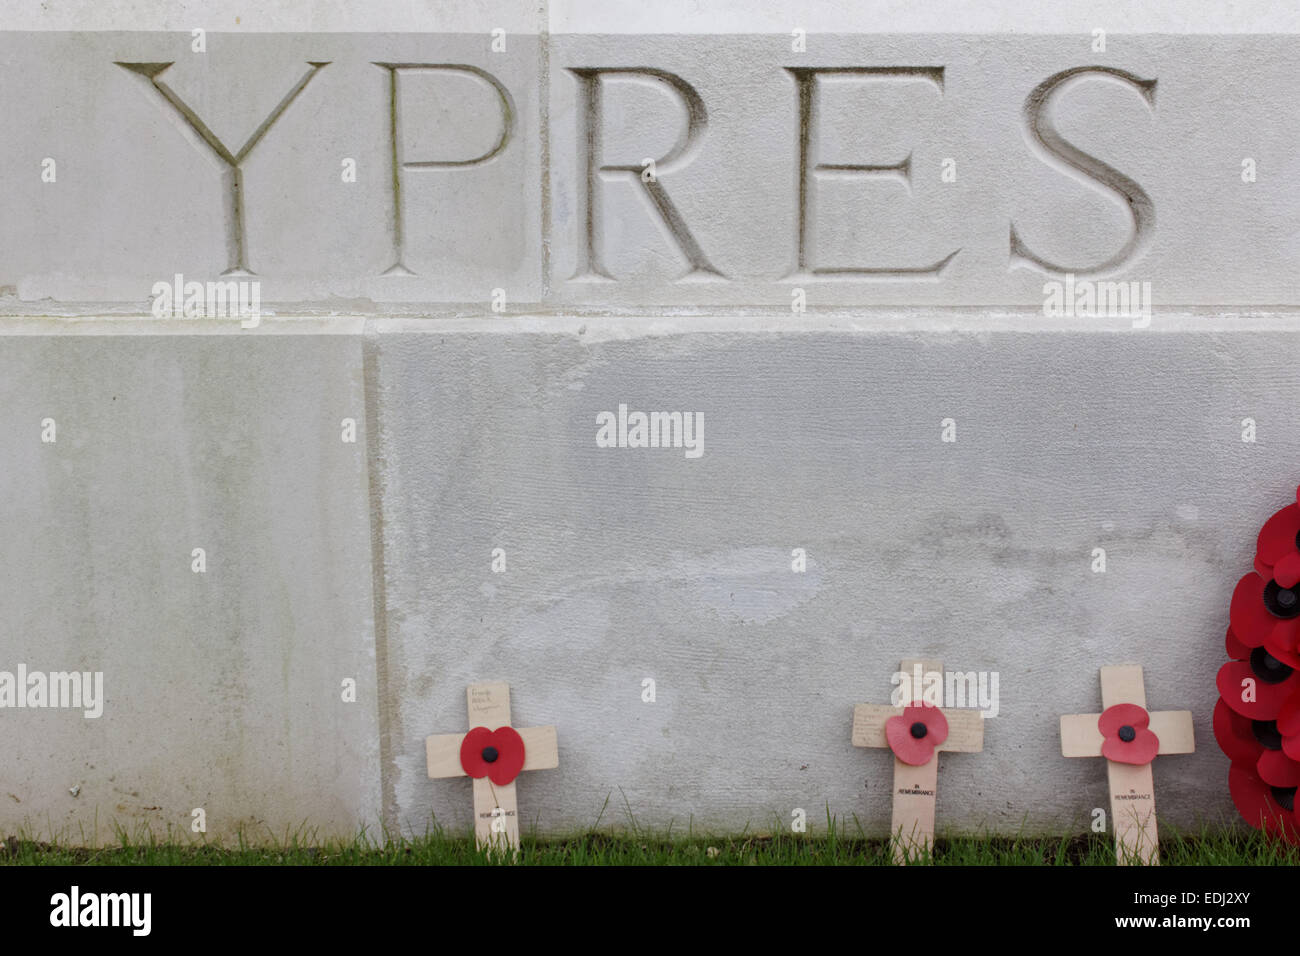 Ypres on a memorial of the great war at Tyne Cot Cemetary in Zonnebeke, Belgien. Stock Photo